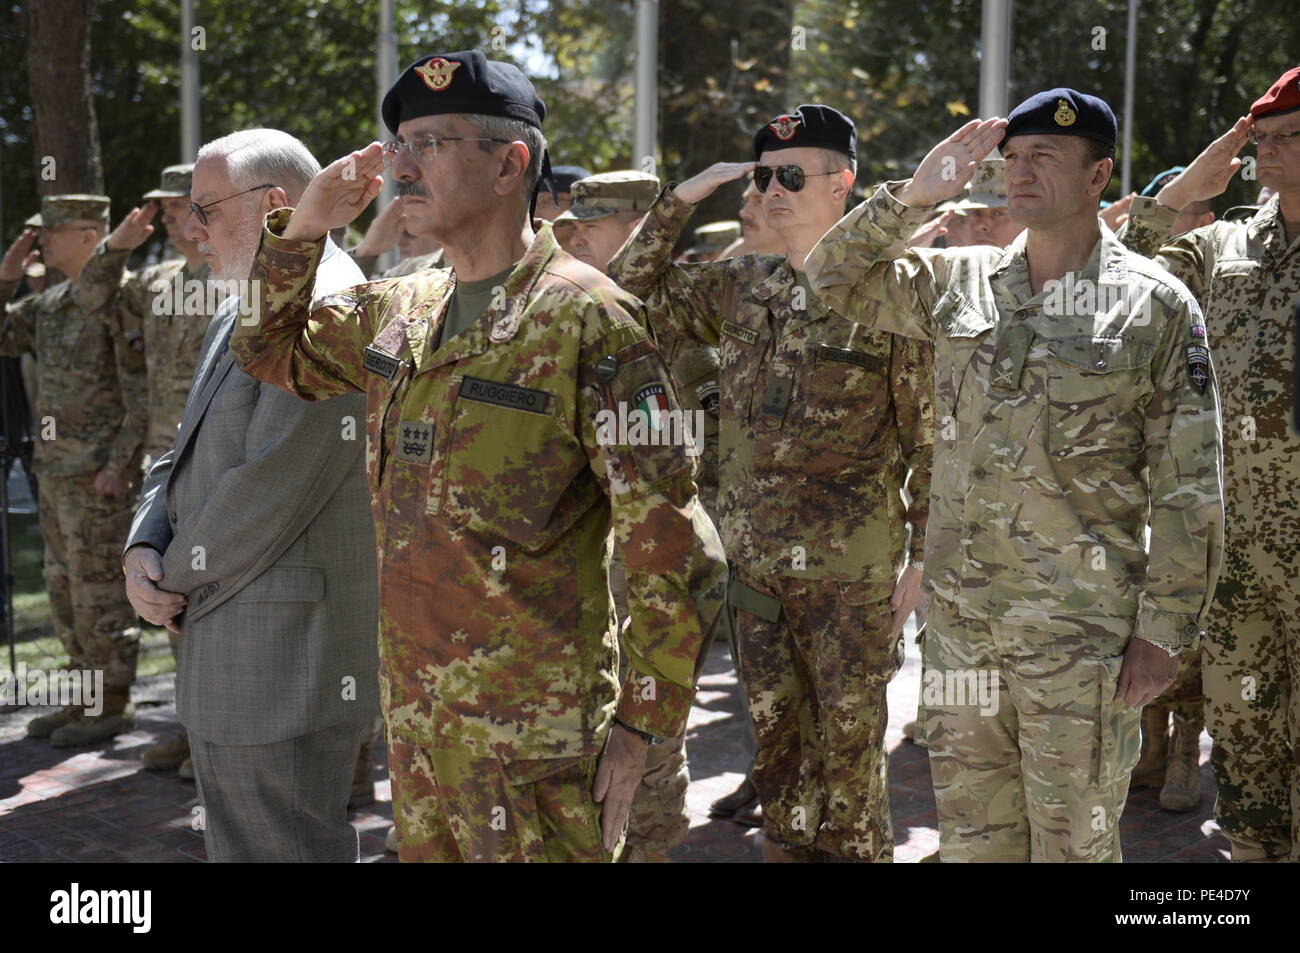 Coalition Troops Stand Together On The Anniversary Of The 9 11 Attacks On America During A Wreath Laying Ceremony Held At Rs Headquarters In Kabul Afghanistan About 1 0 Rs Members From 42 Countries